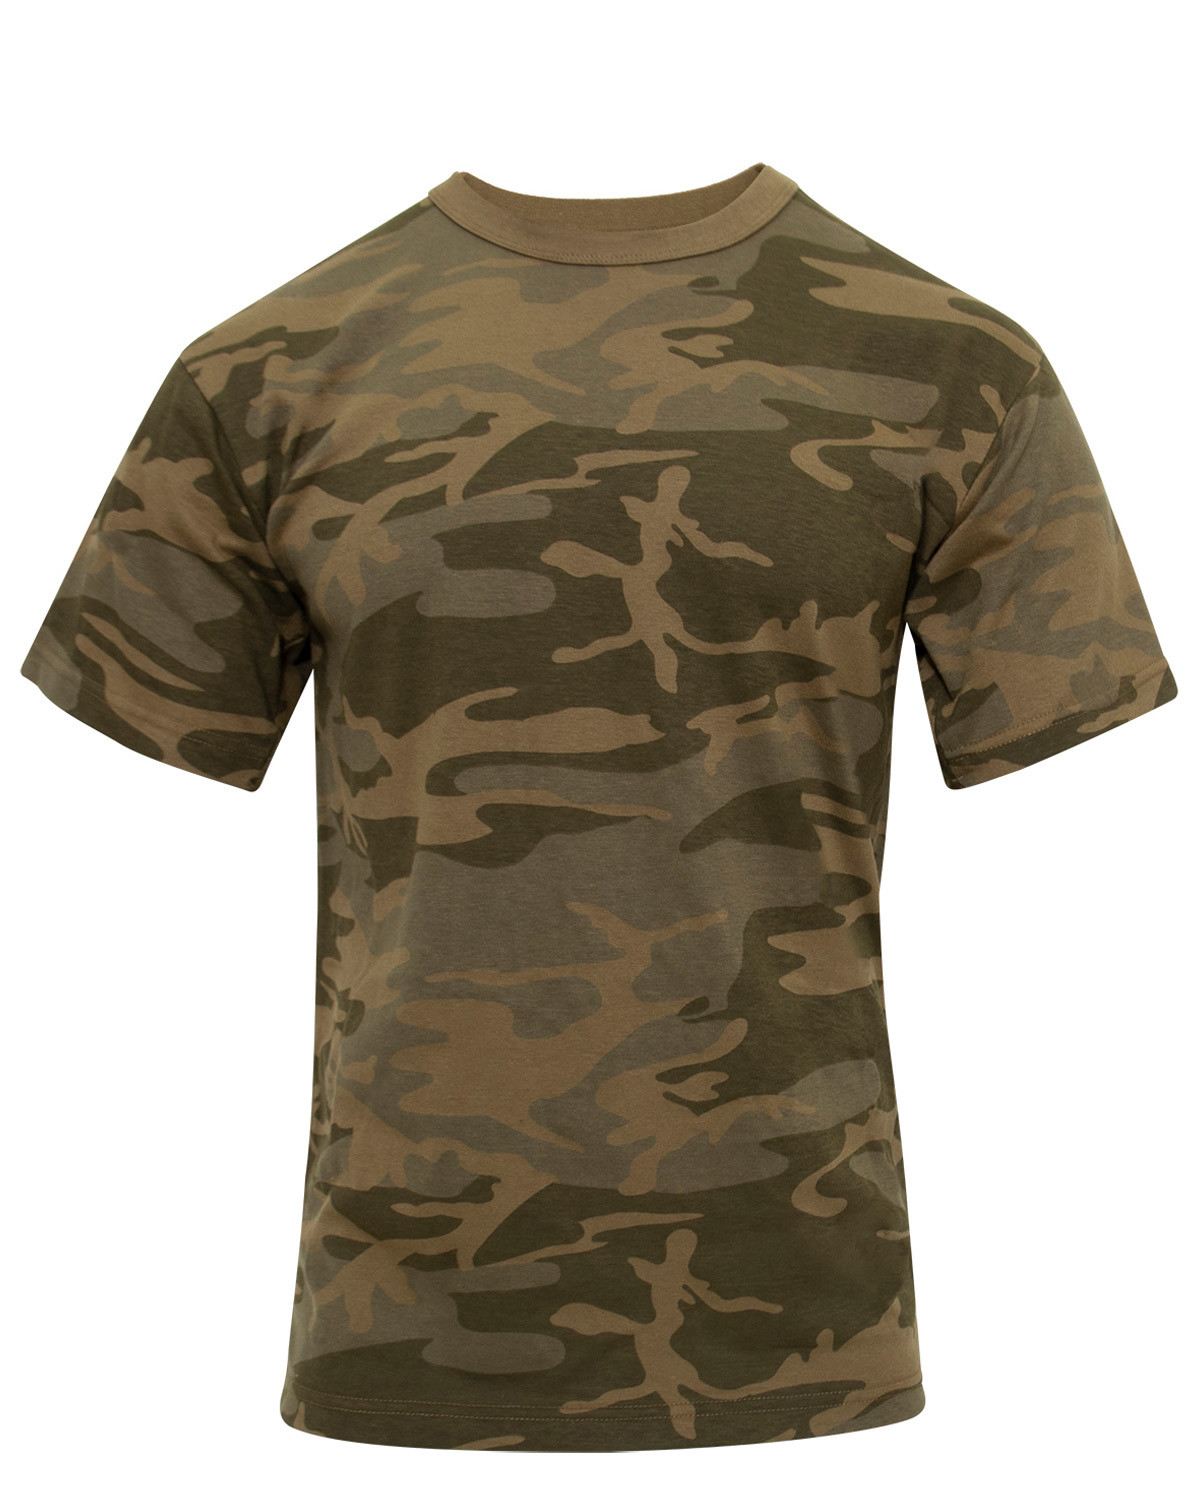 Rothco T-shirt - Mange Camouflager (Duck Camo, 3XL)